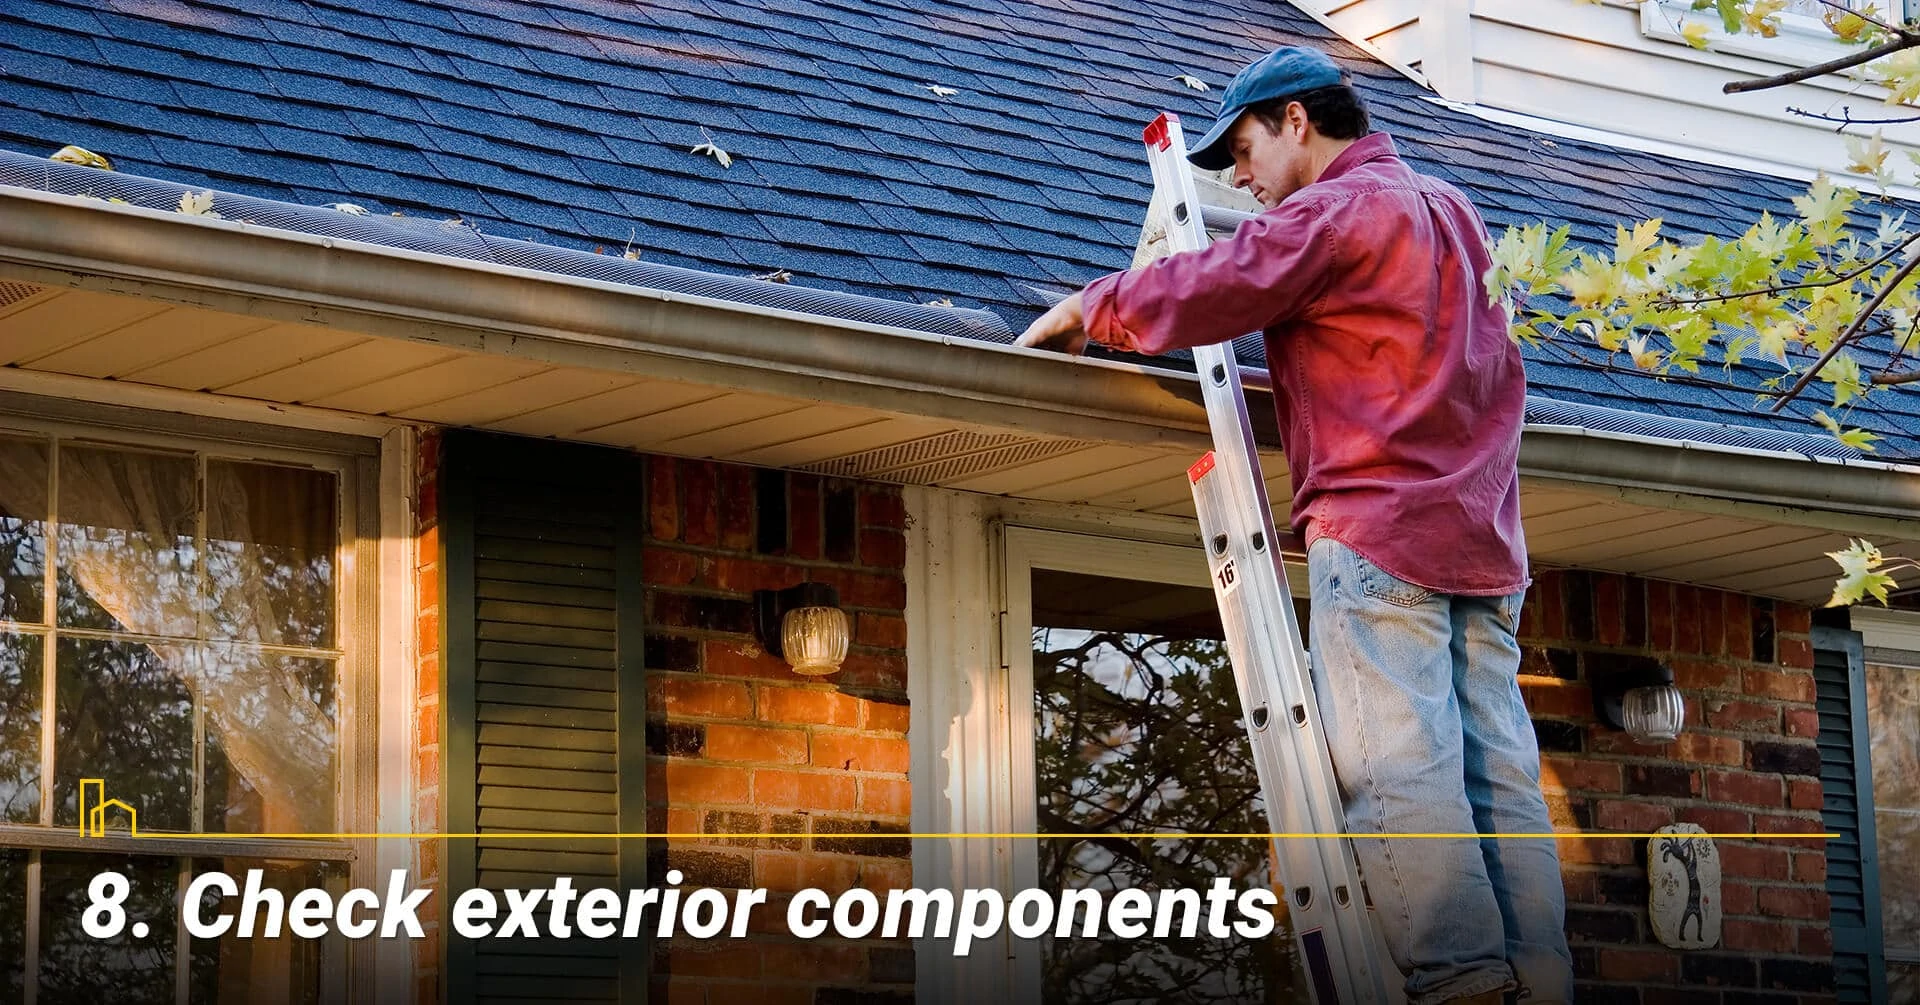 Check exterior components, inspect the exterior